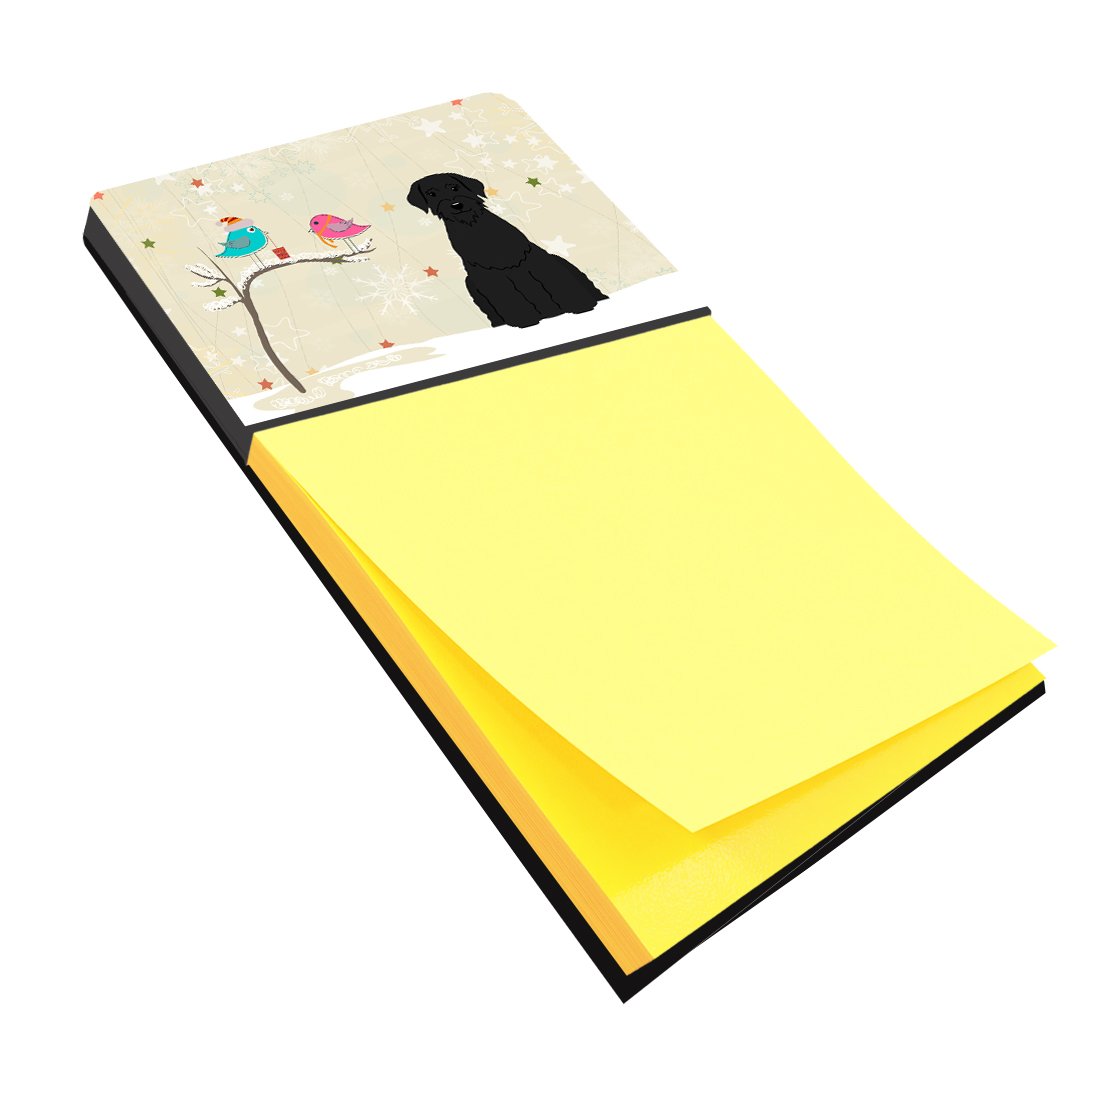 Christmas Presents between Friends Giant Schnauzer Sticky Note Holder BB2538SN by Caroline's Treasures